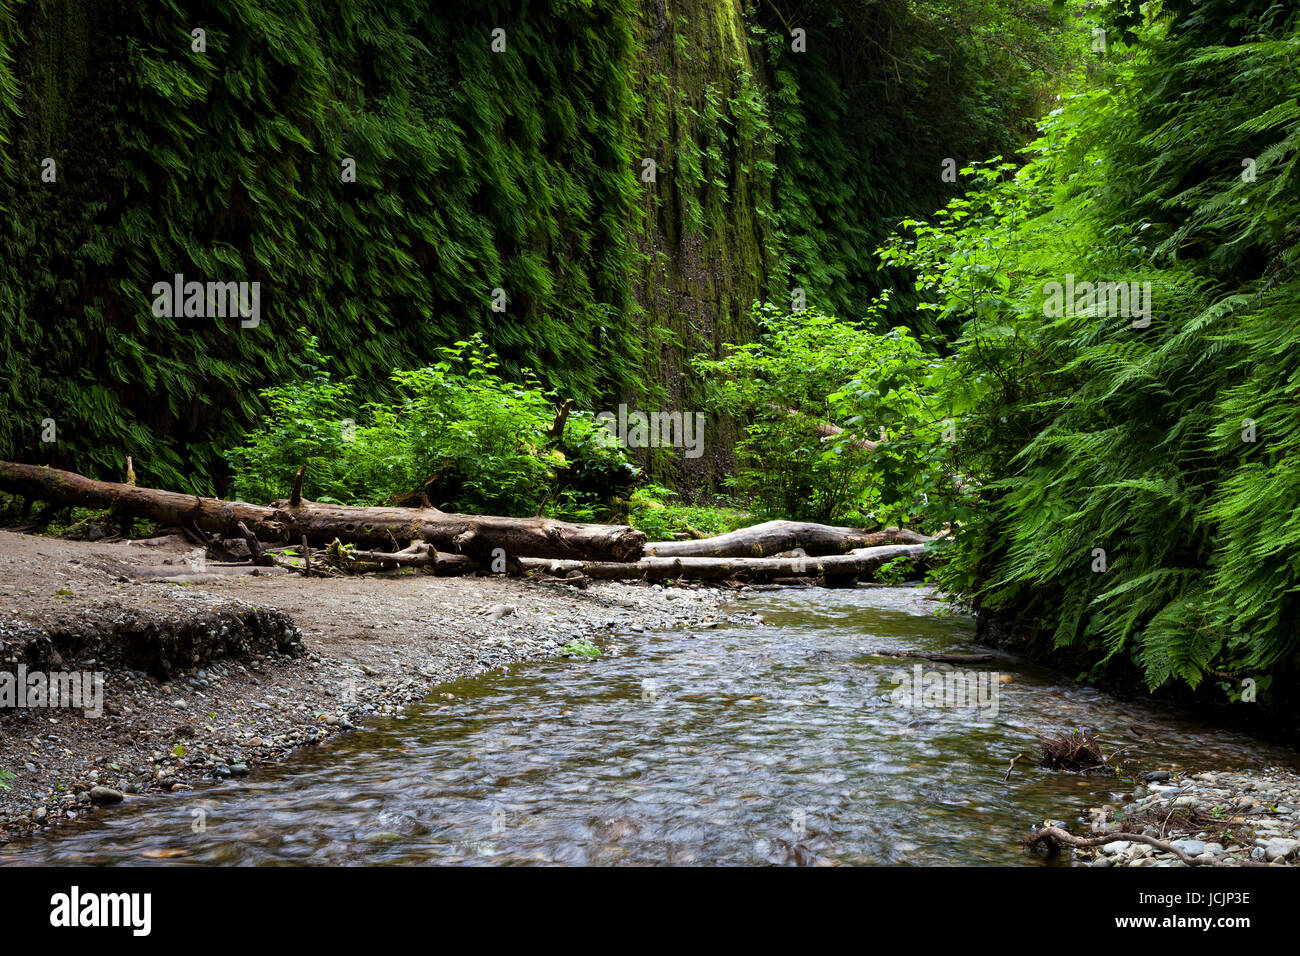 Home Creek flows past the fern and moss covered walls of Fern Canyon in Northern California's Prairie Creek Redwoods State Park. Prairie Creek Redwood Stock Photo